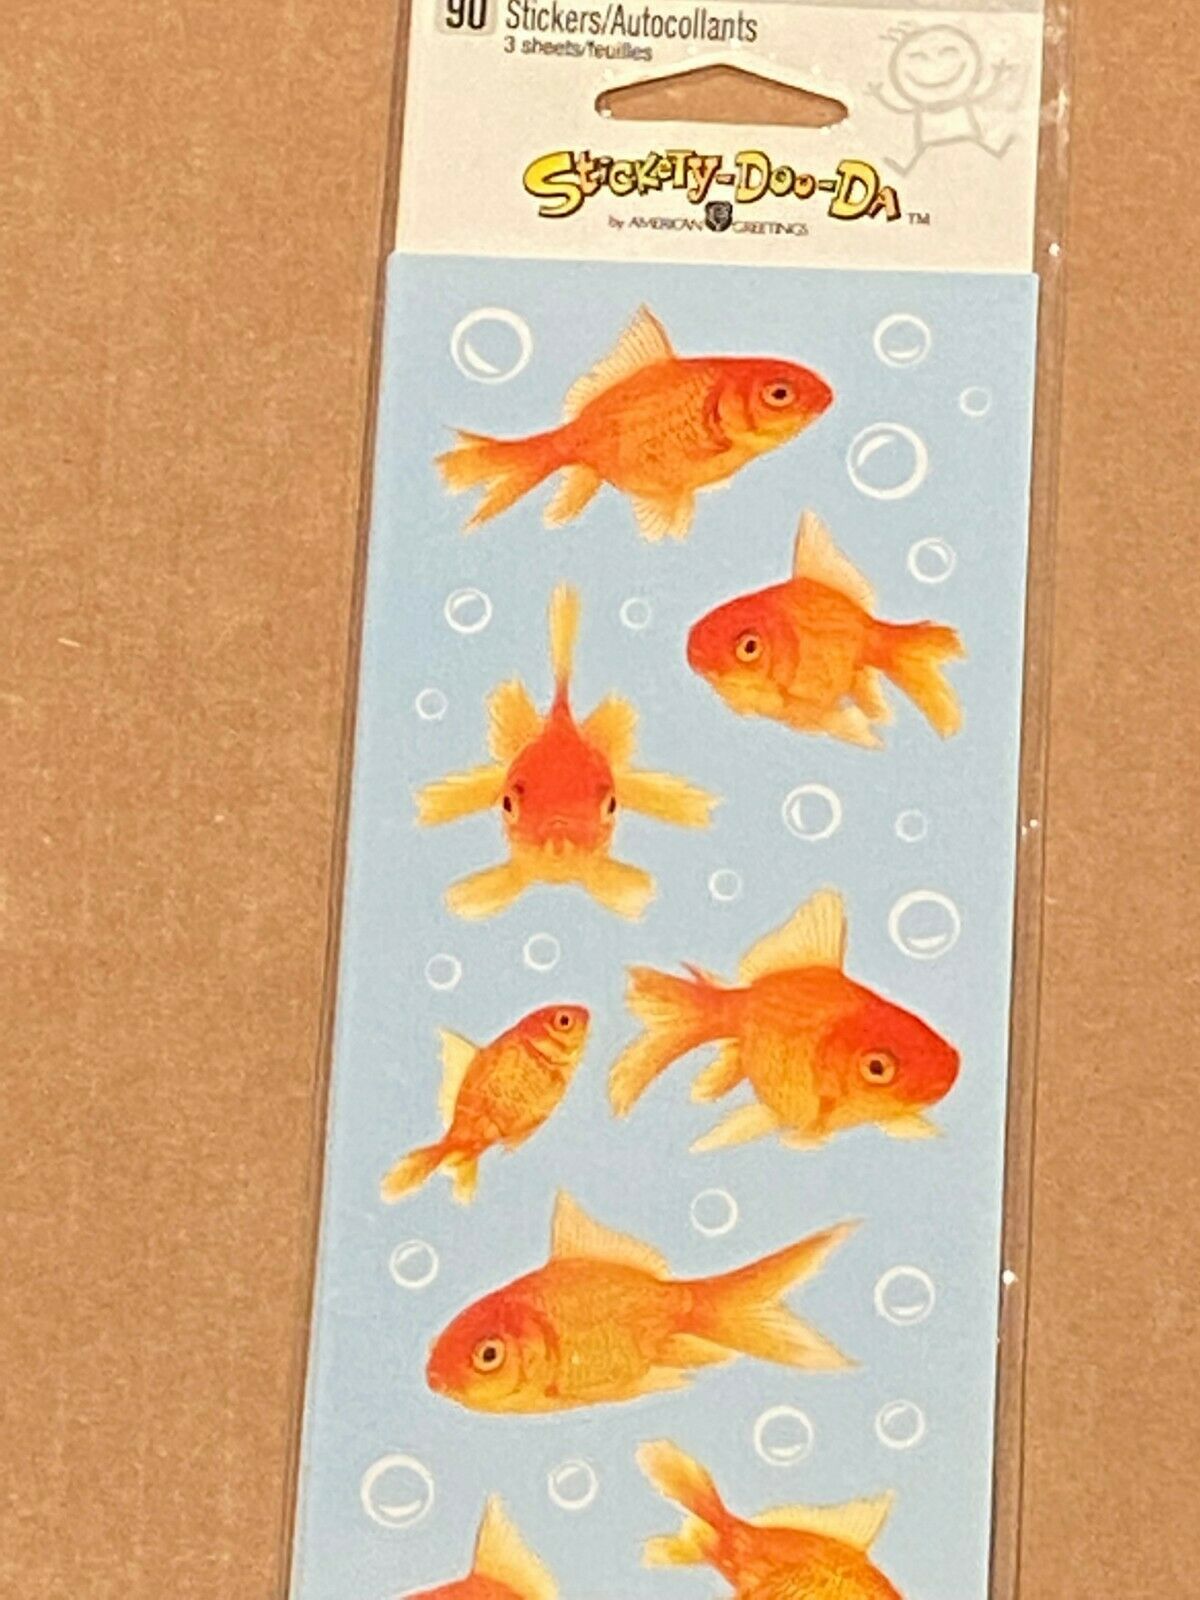 American Greetings Goldfish & Bubbles Stickers 90 Stickers*NEW/SEALED* bb1 - $5.99